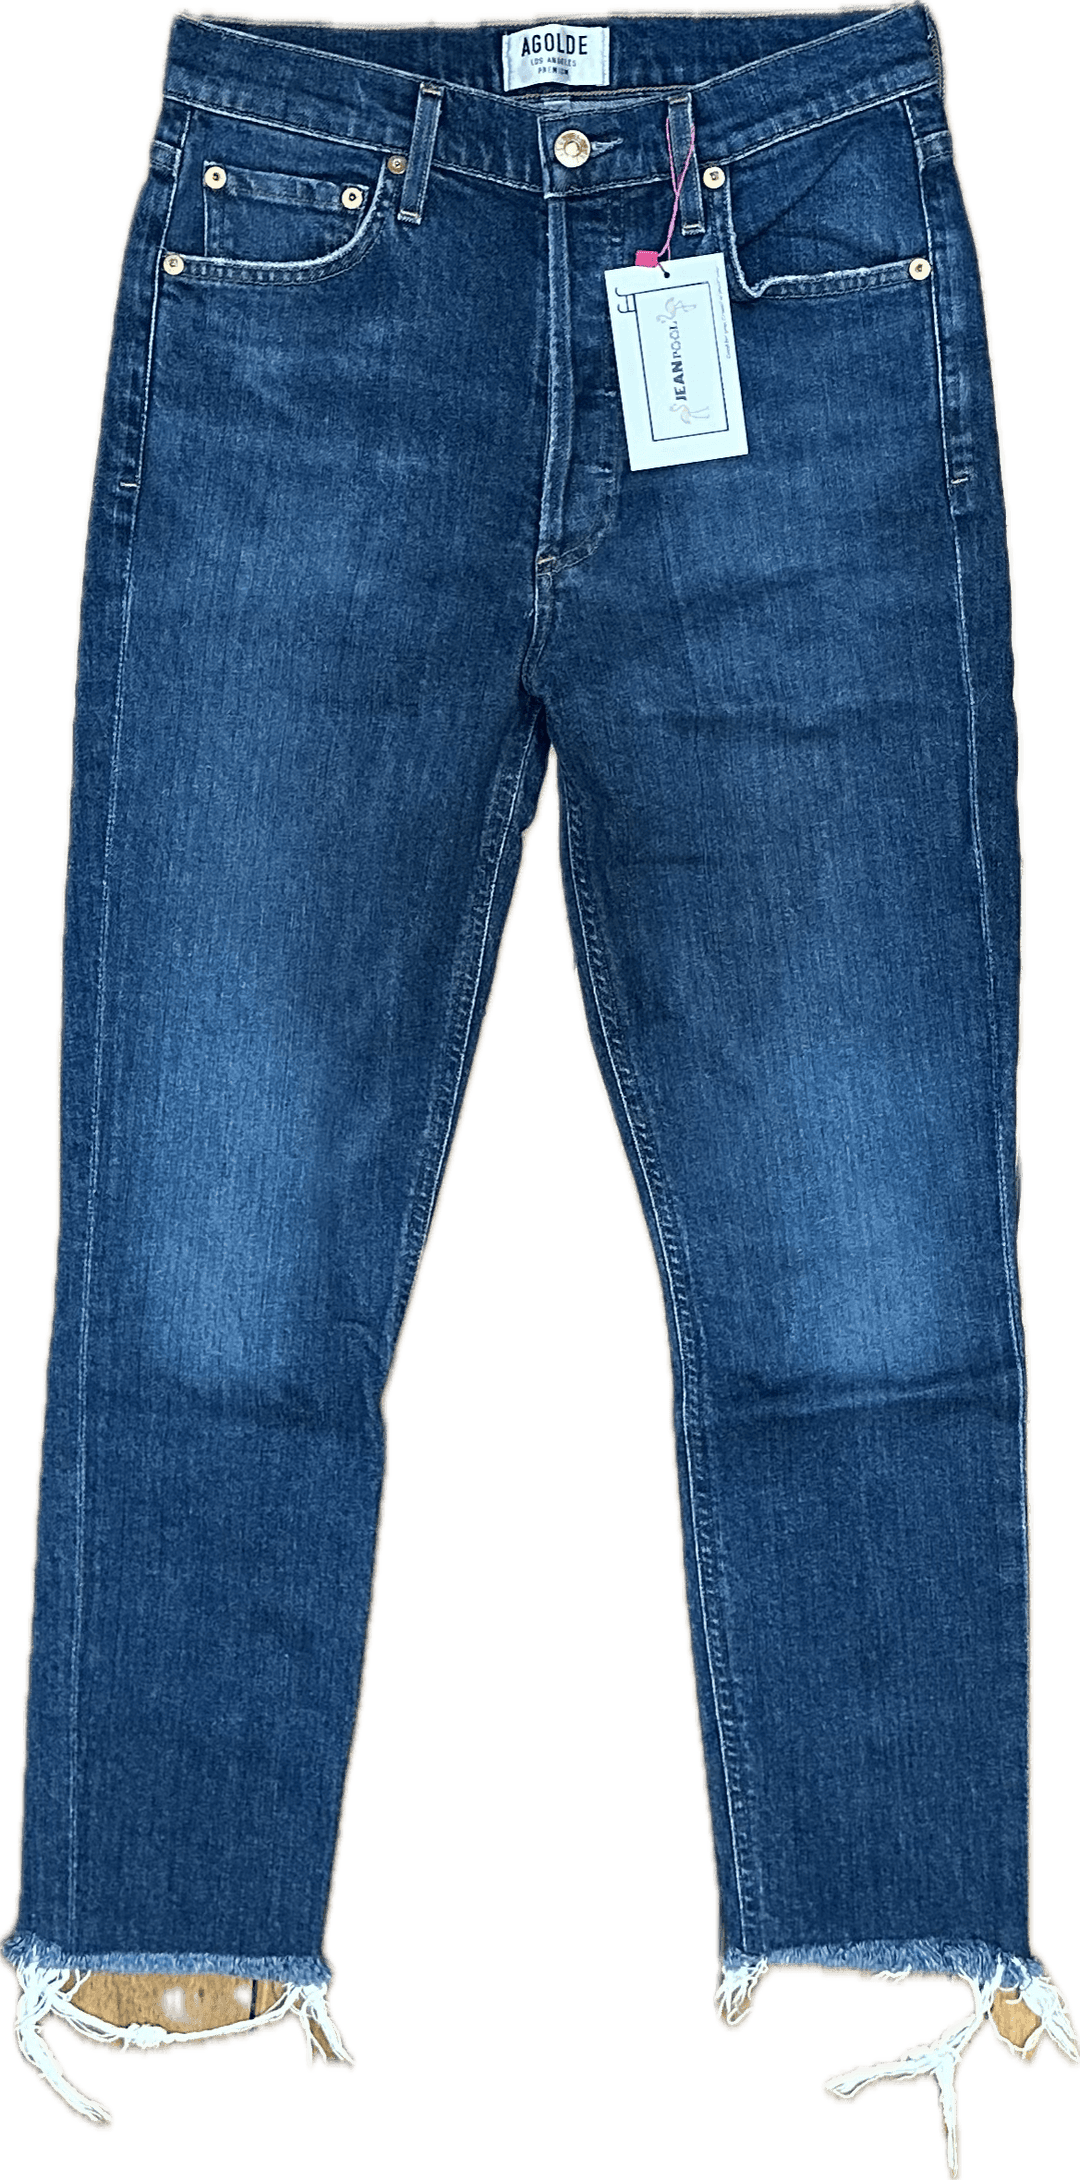 AGOLDE High Rise Button Fly Tapered Jeans- Size 27 - Jean Pool